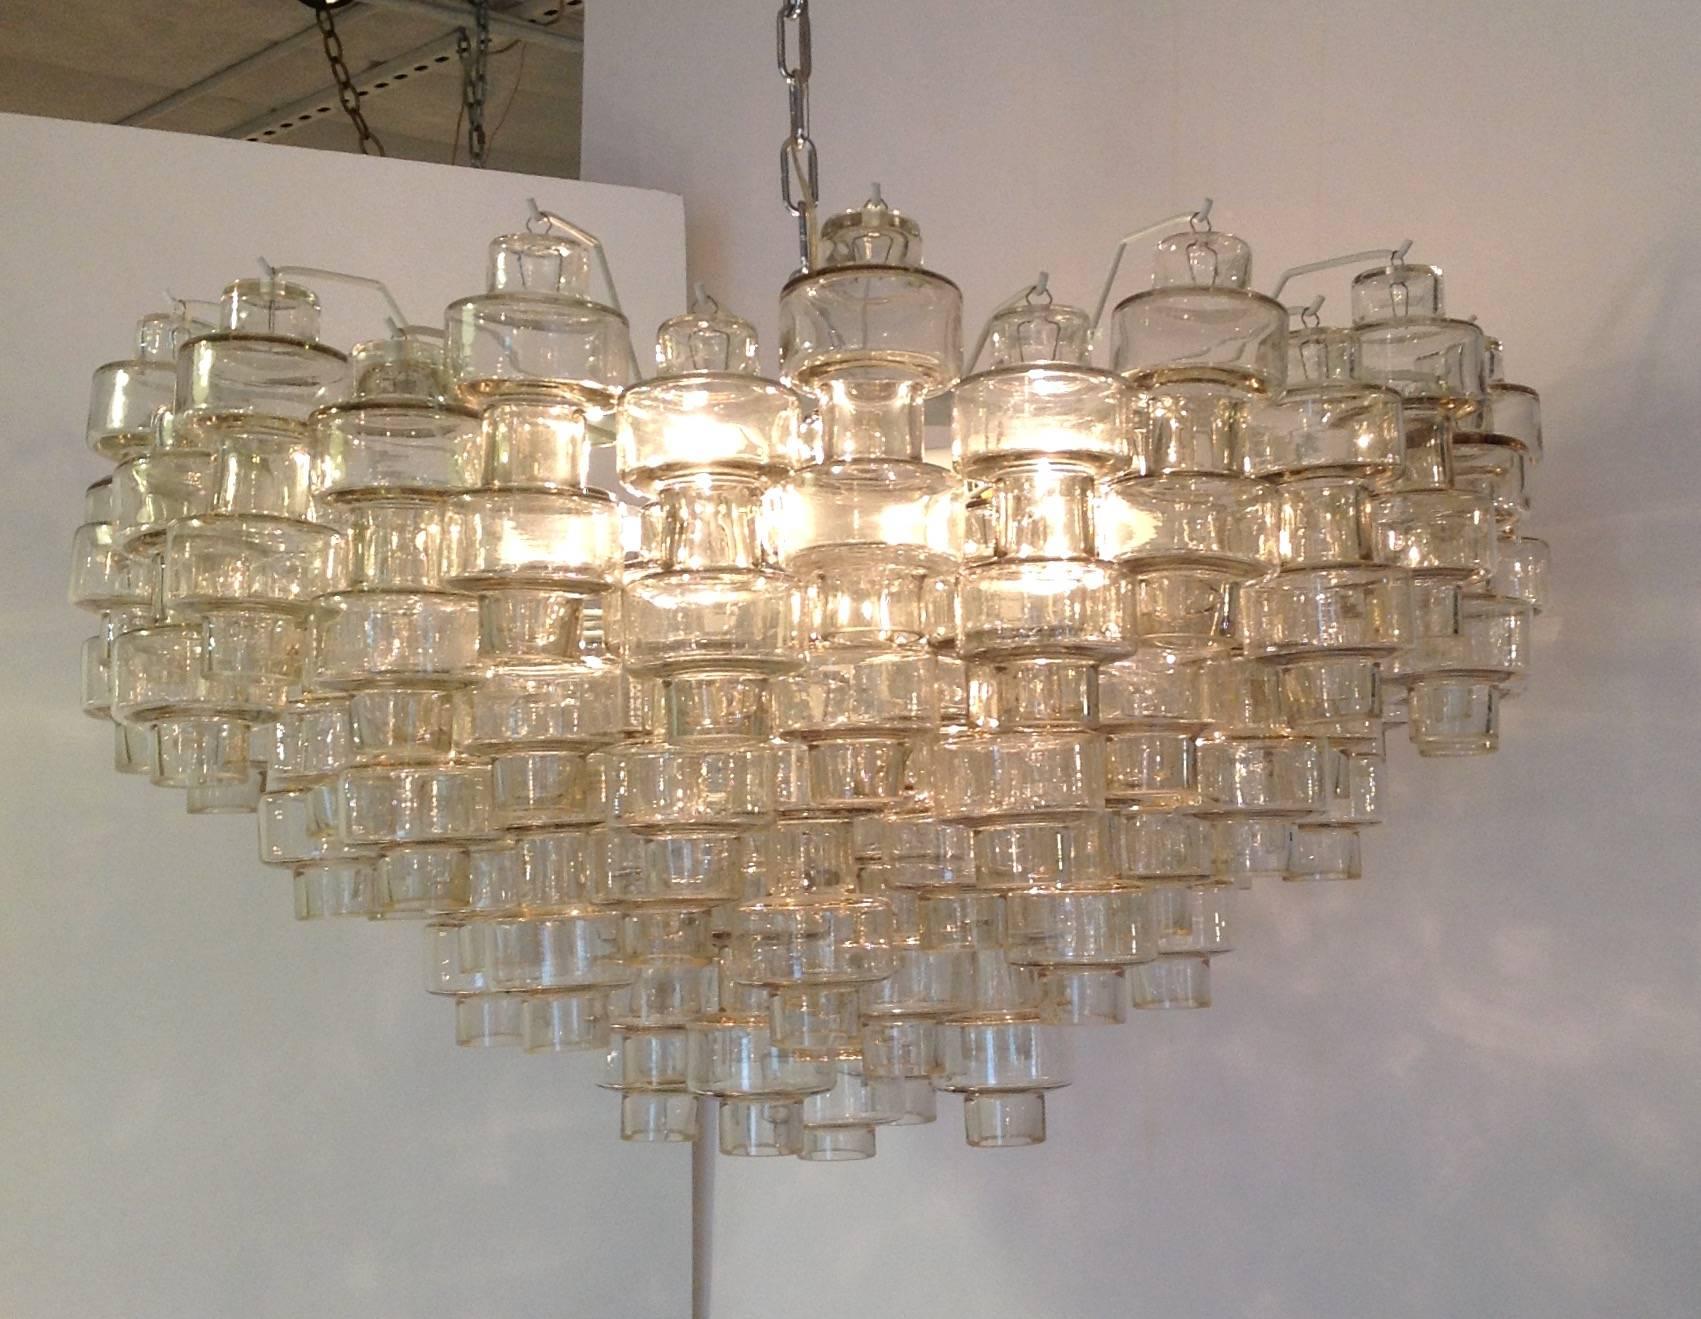 Large clear glass Murano round chandelier that could be flush mounted. Each barbell shaped glass pendant is clear. It has 4 light sockets. It has a white frame. Made in Italy in the 1960s.